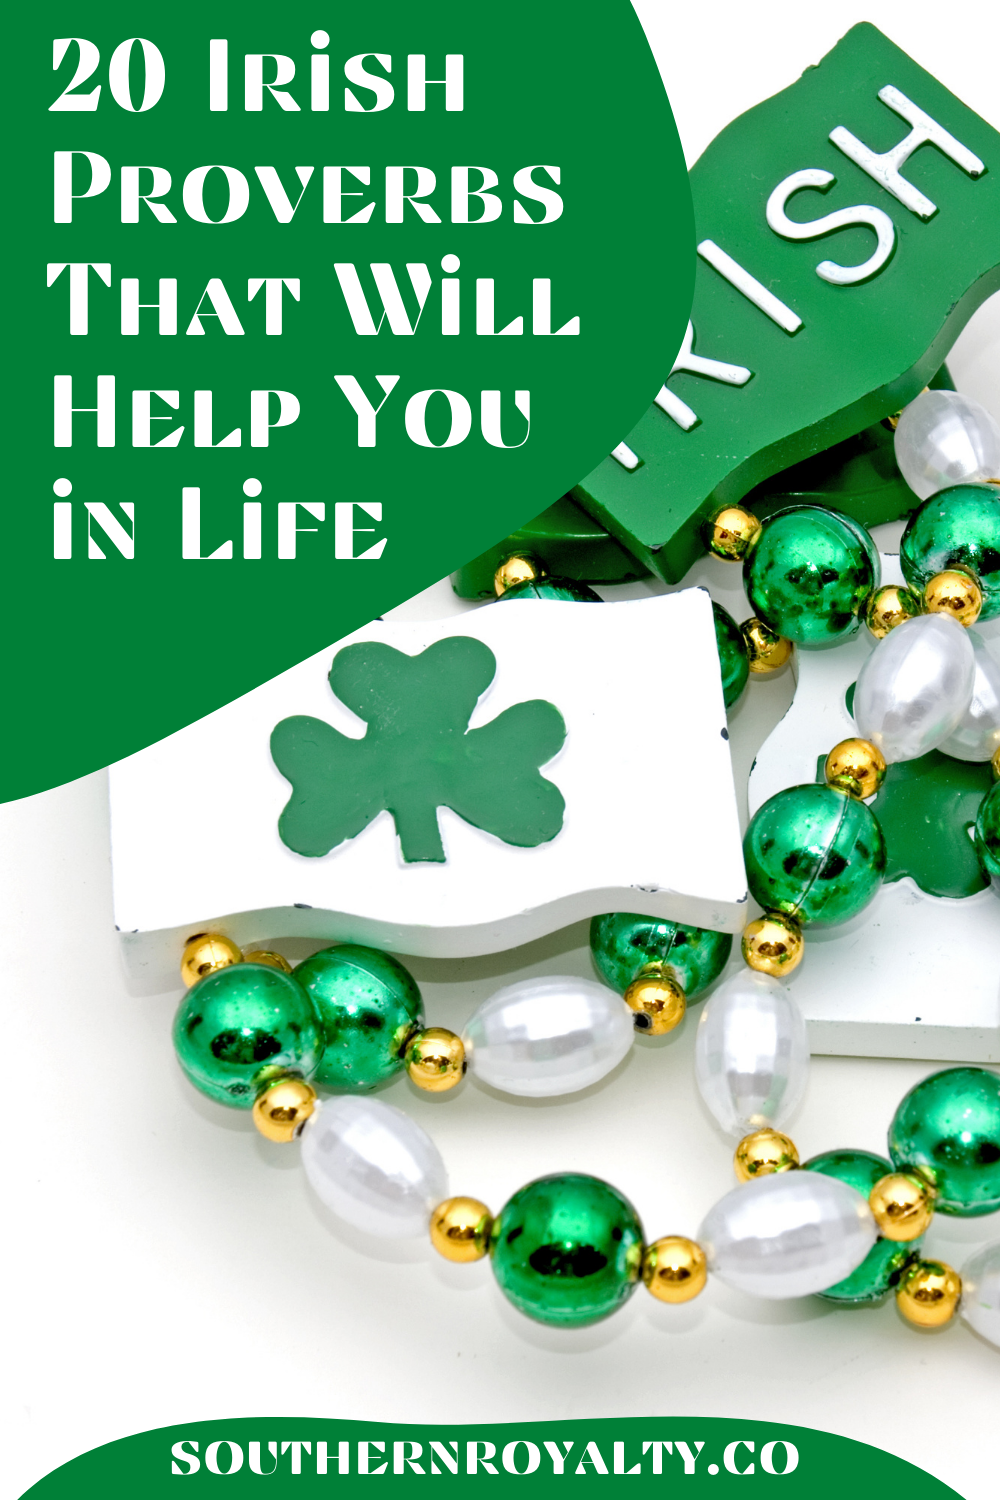 20 Irish Proverbs that can help you in life quotes sayings blessings words of wisdom